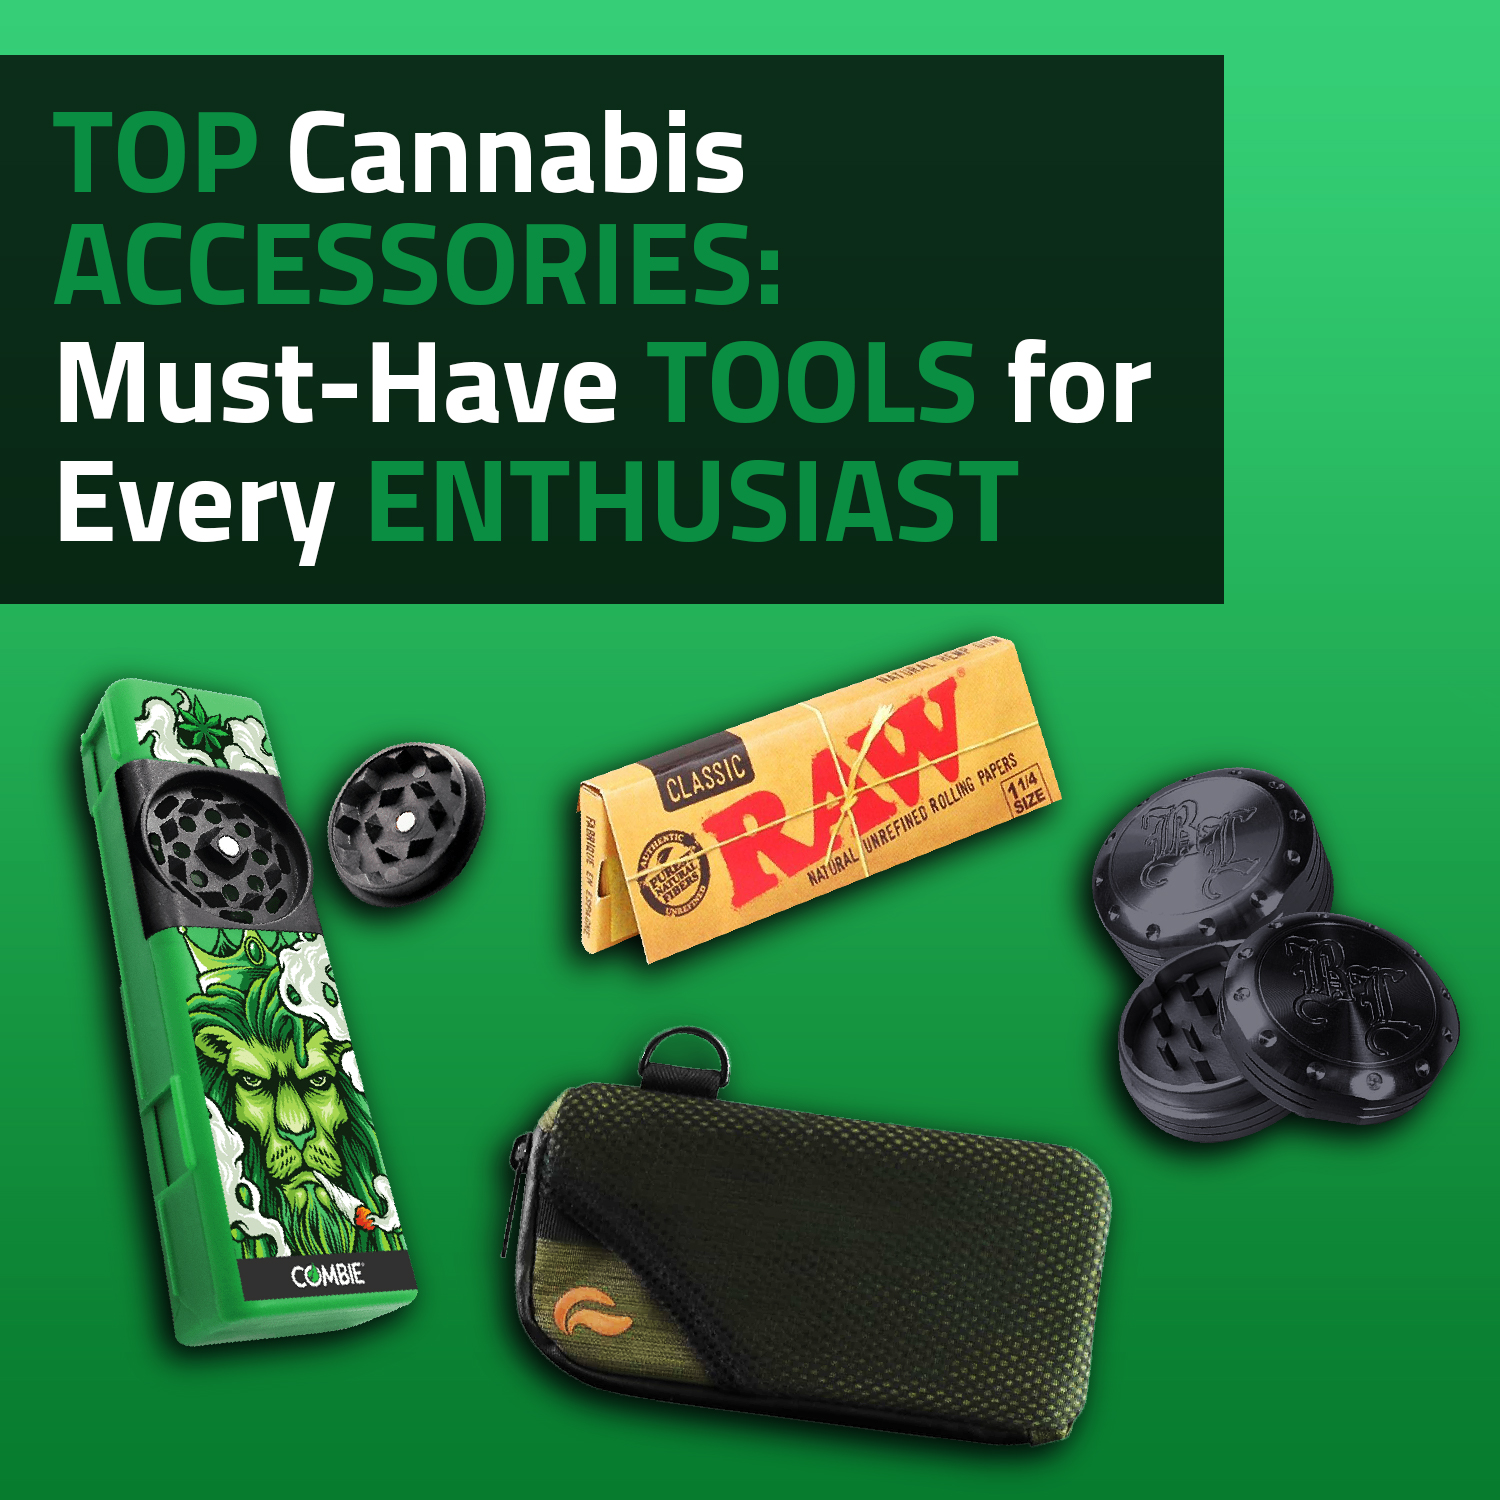 Top Cannabis Accessories: Must-Have Tools For Every Enthusiast